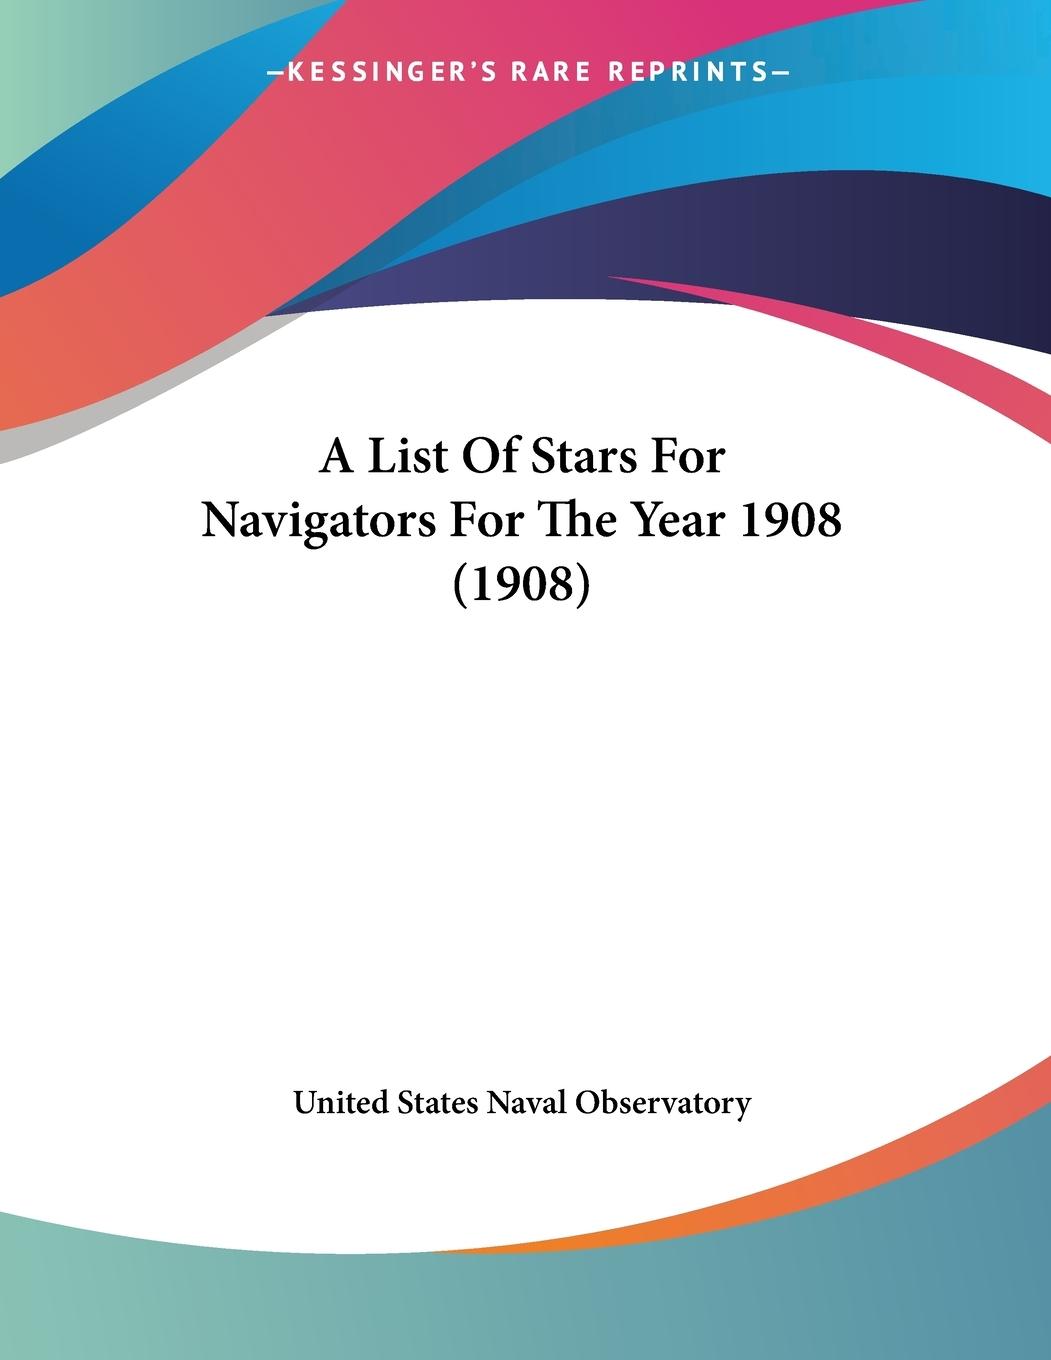 A List Of Stars For Navigators For The Year 1908 (1908) - United States Naval Observatory